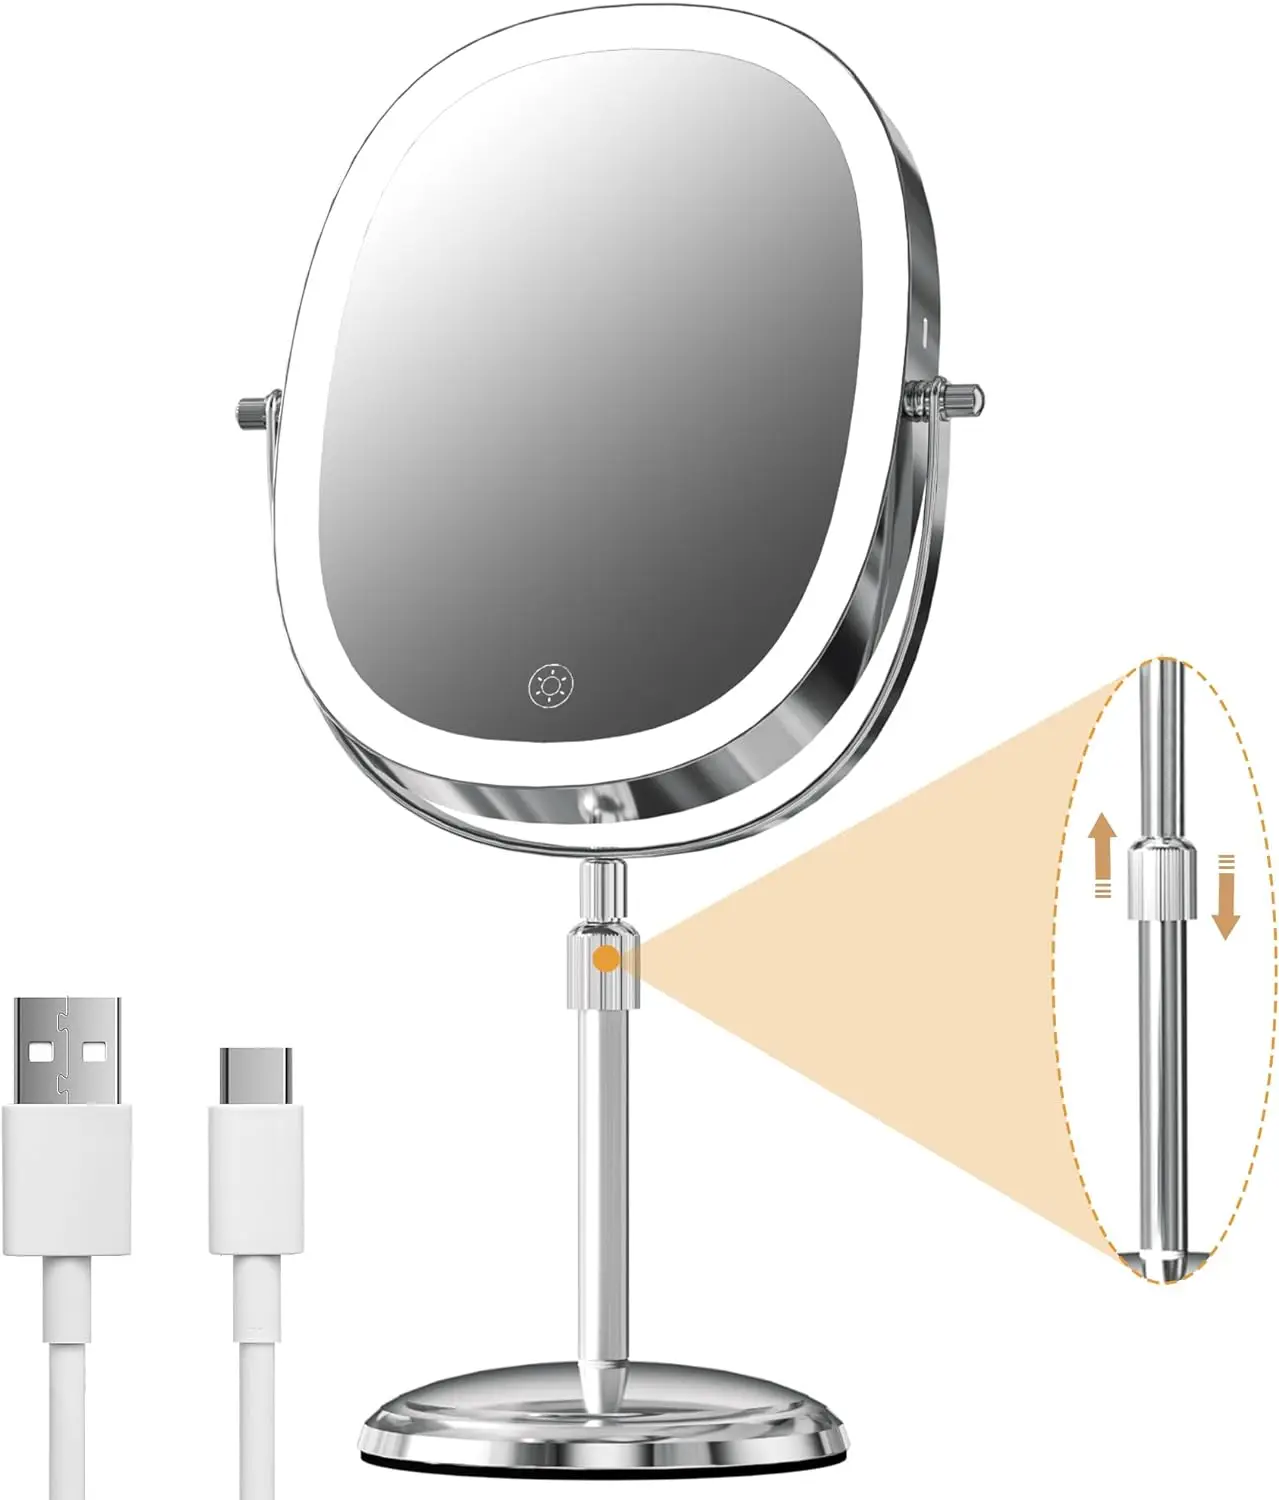 

Lighted Vanity Makeup Mirror, 1x/7x Desk Magnification Mirror with 3 Color Lights, Double Sided Dimmable LED Tabletop Mirror wit